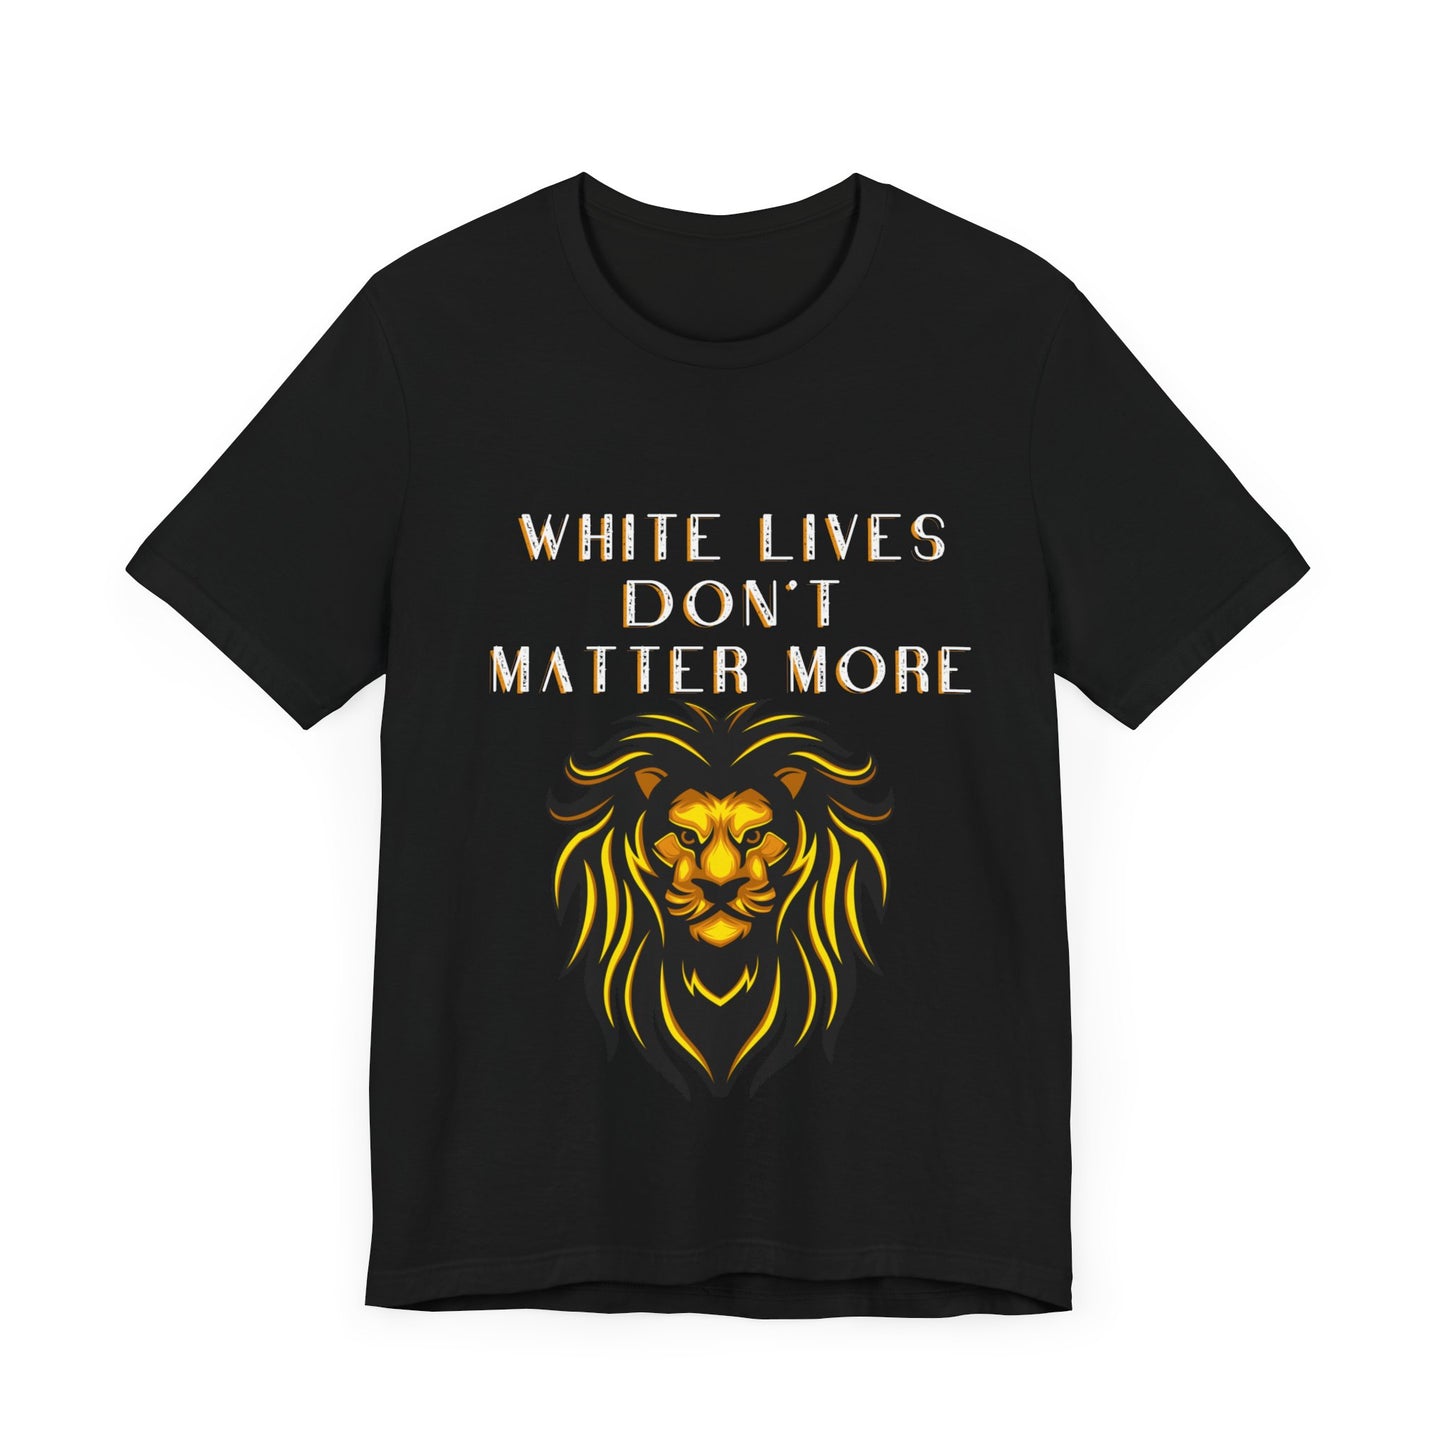 "White Lives Don't Matter More" Short Sleeve Jersey T-Shirt with Bold Text and Lion Graphic